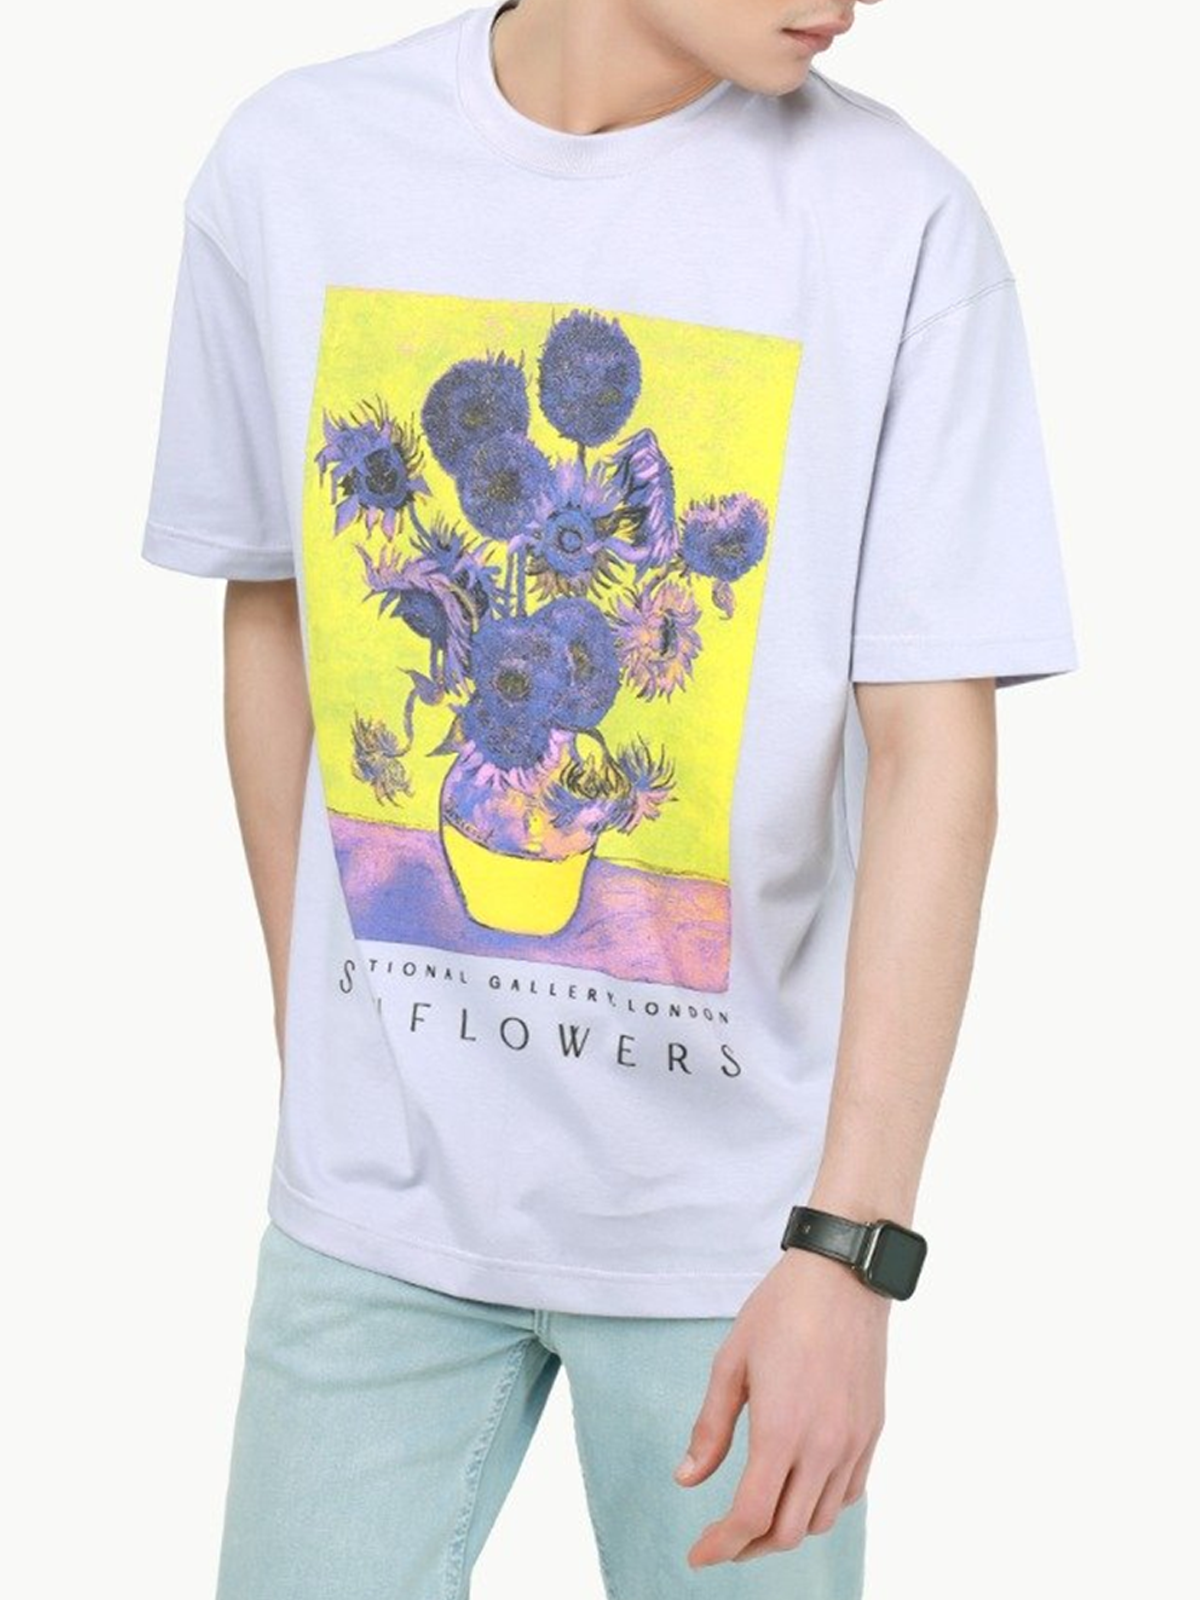 Relax Fit Crew Neck Graphic Tee - FMTGL23-001